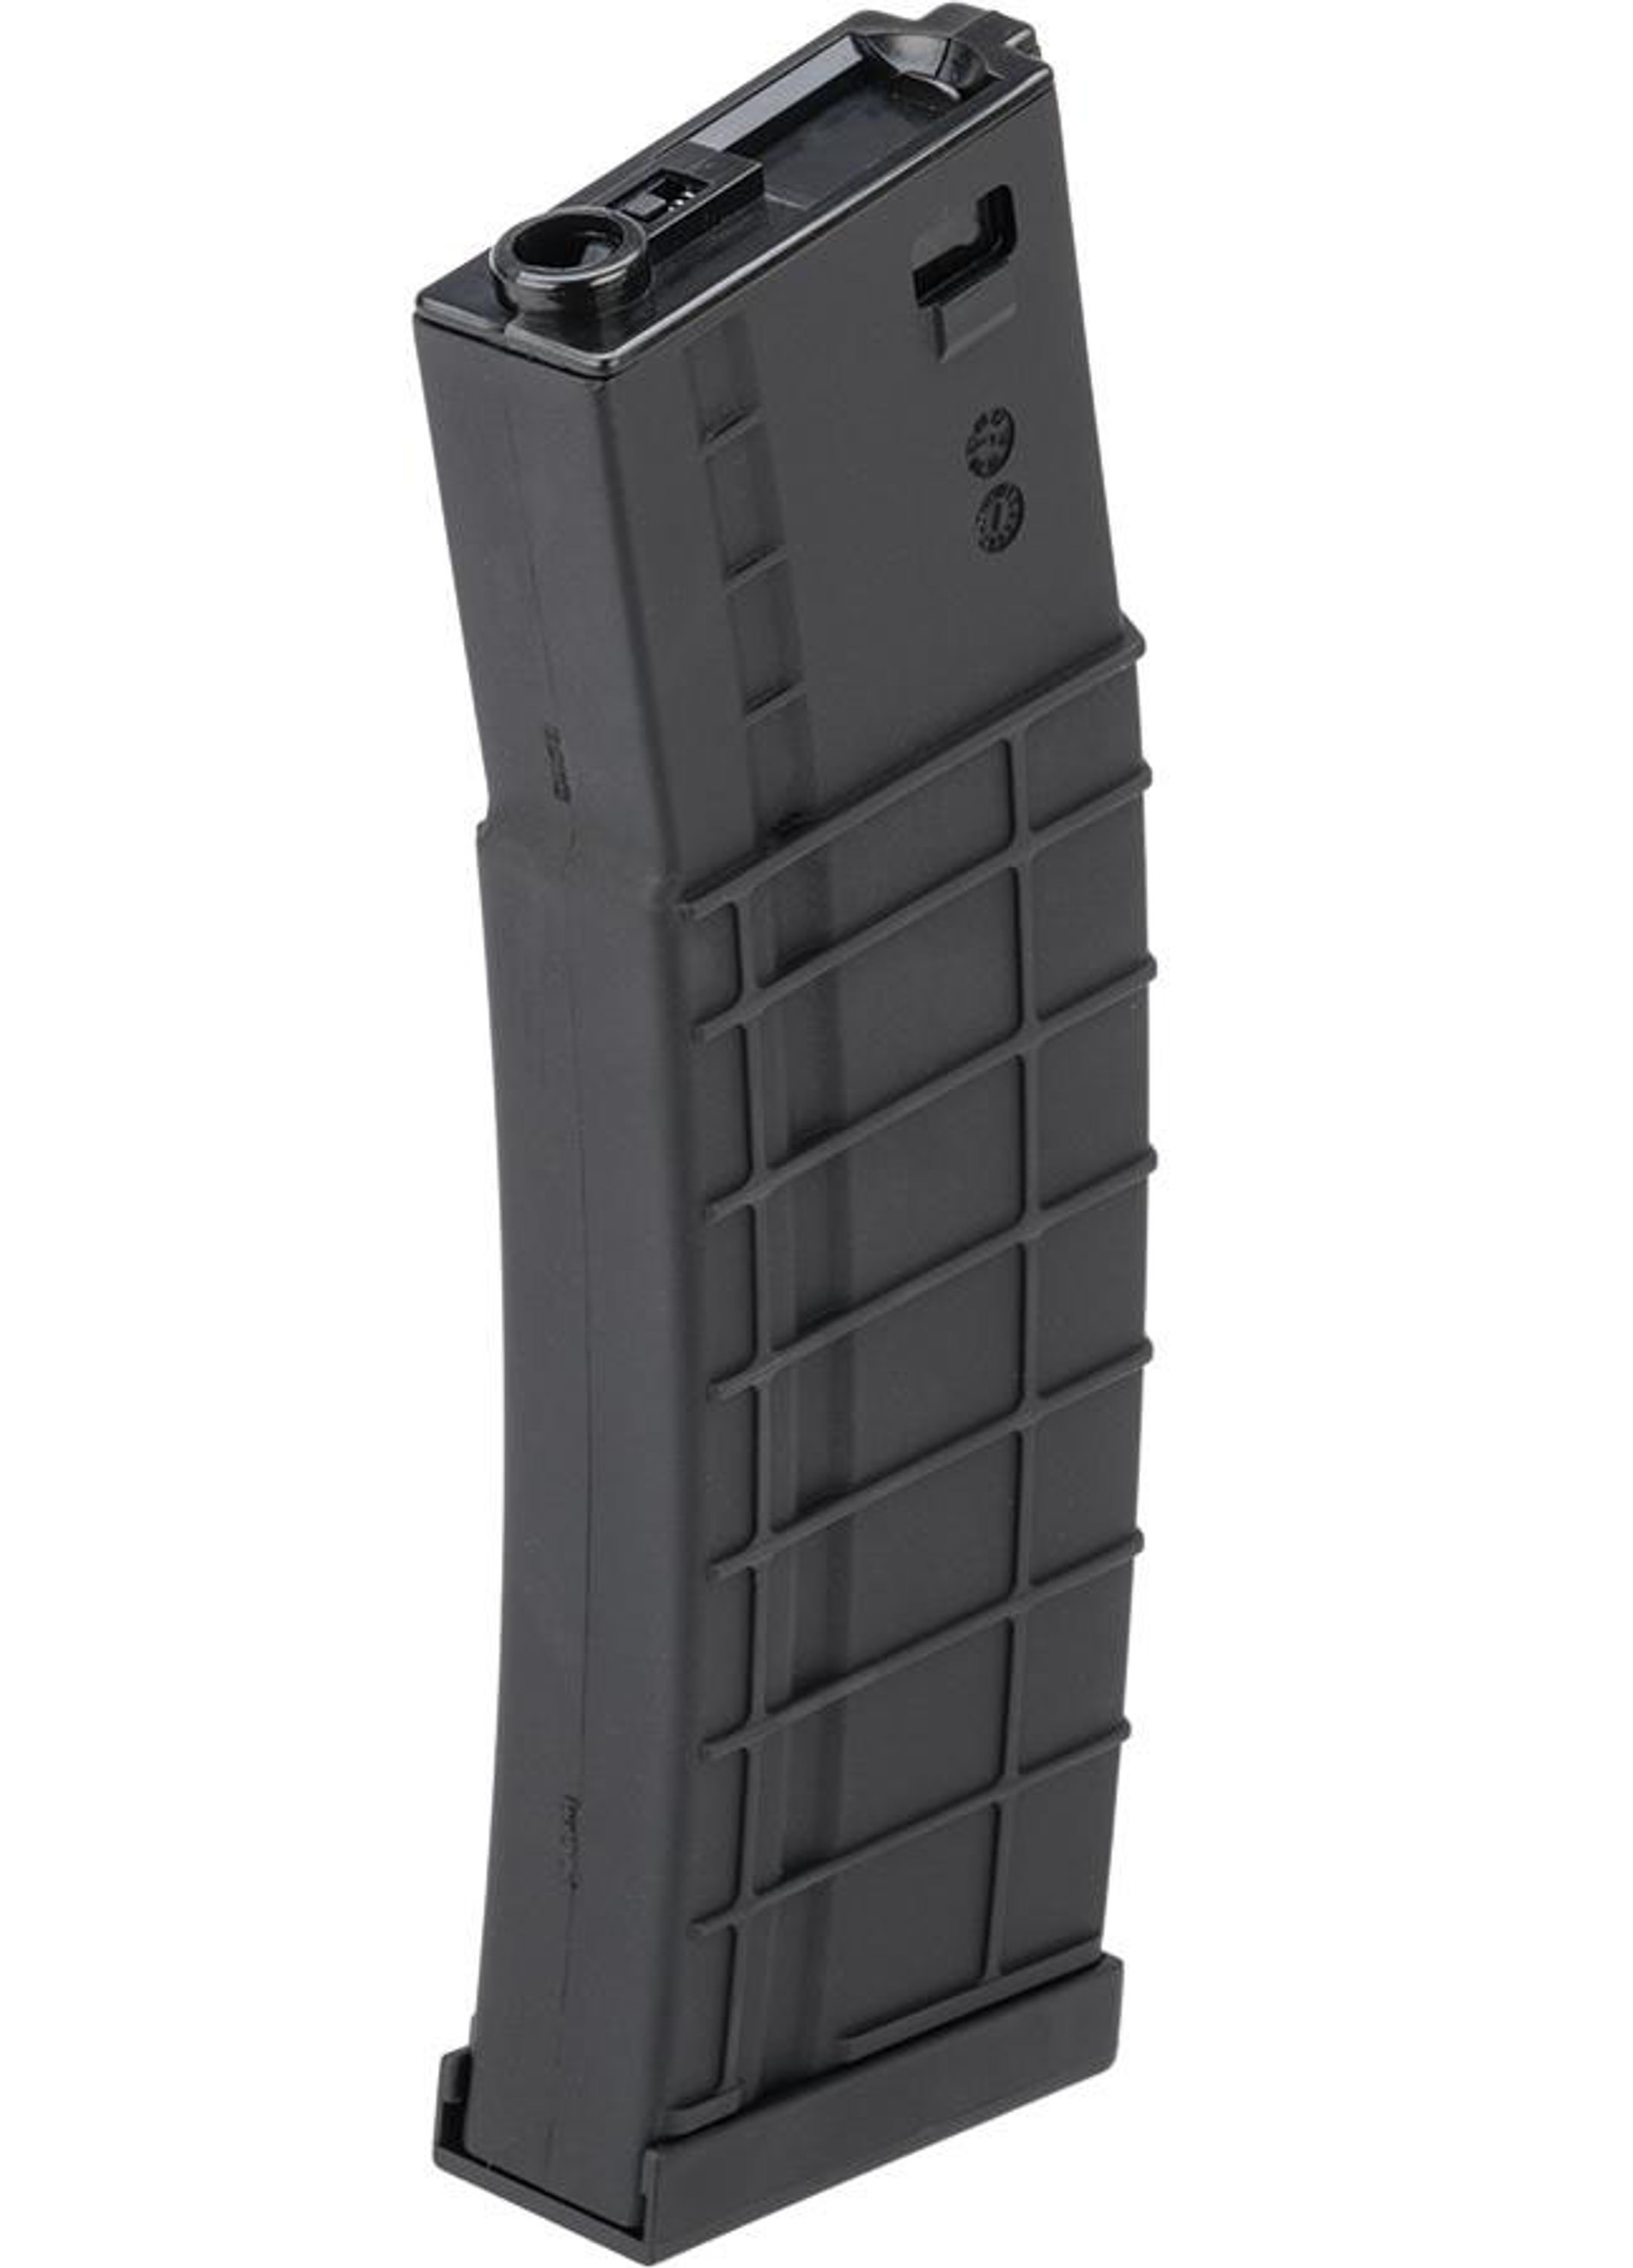 Avengers Ribbed Polymer Extended Magazine for M4/M16 Series Airsoft AEG Rifles (Color: Black / 450rd High-Cap)